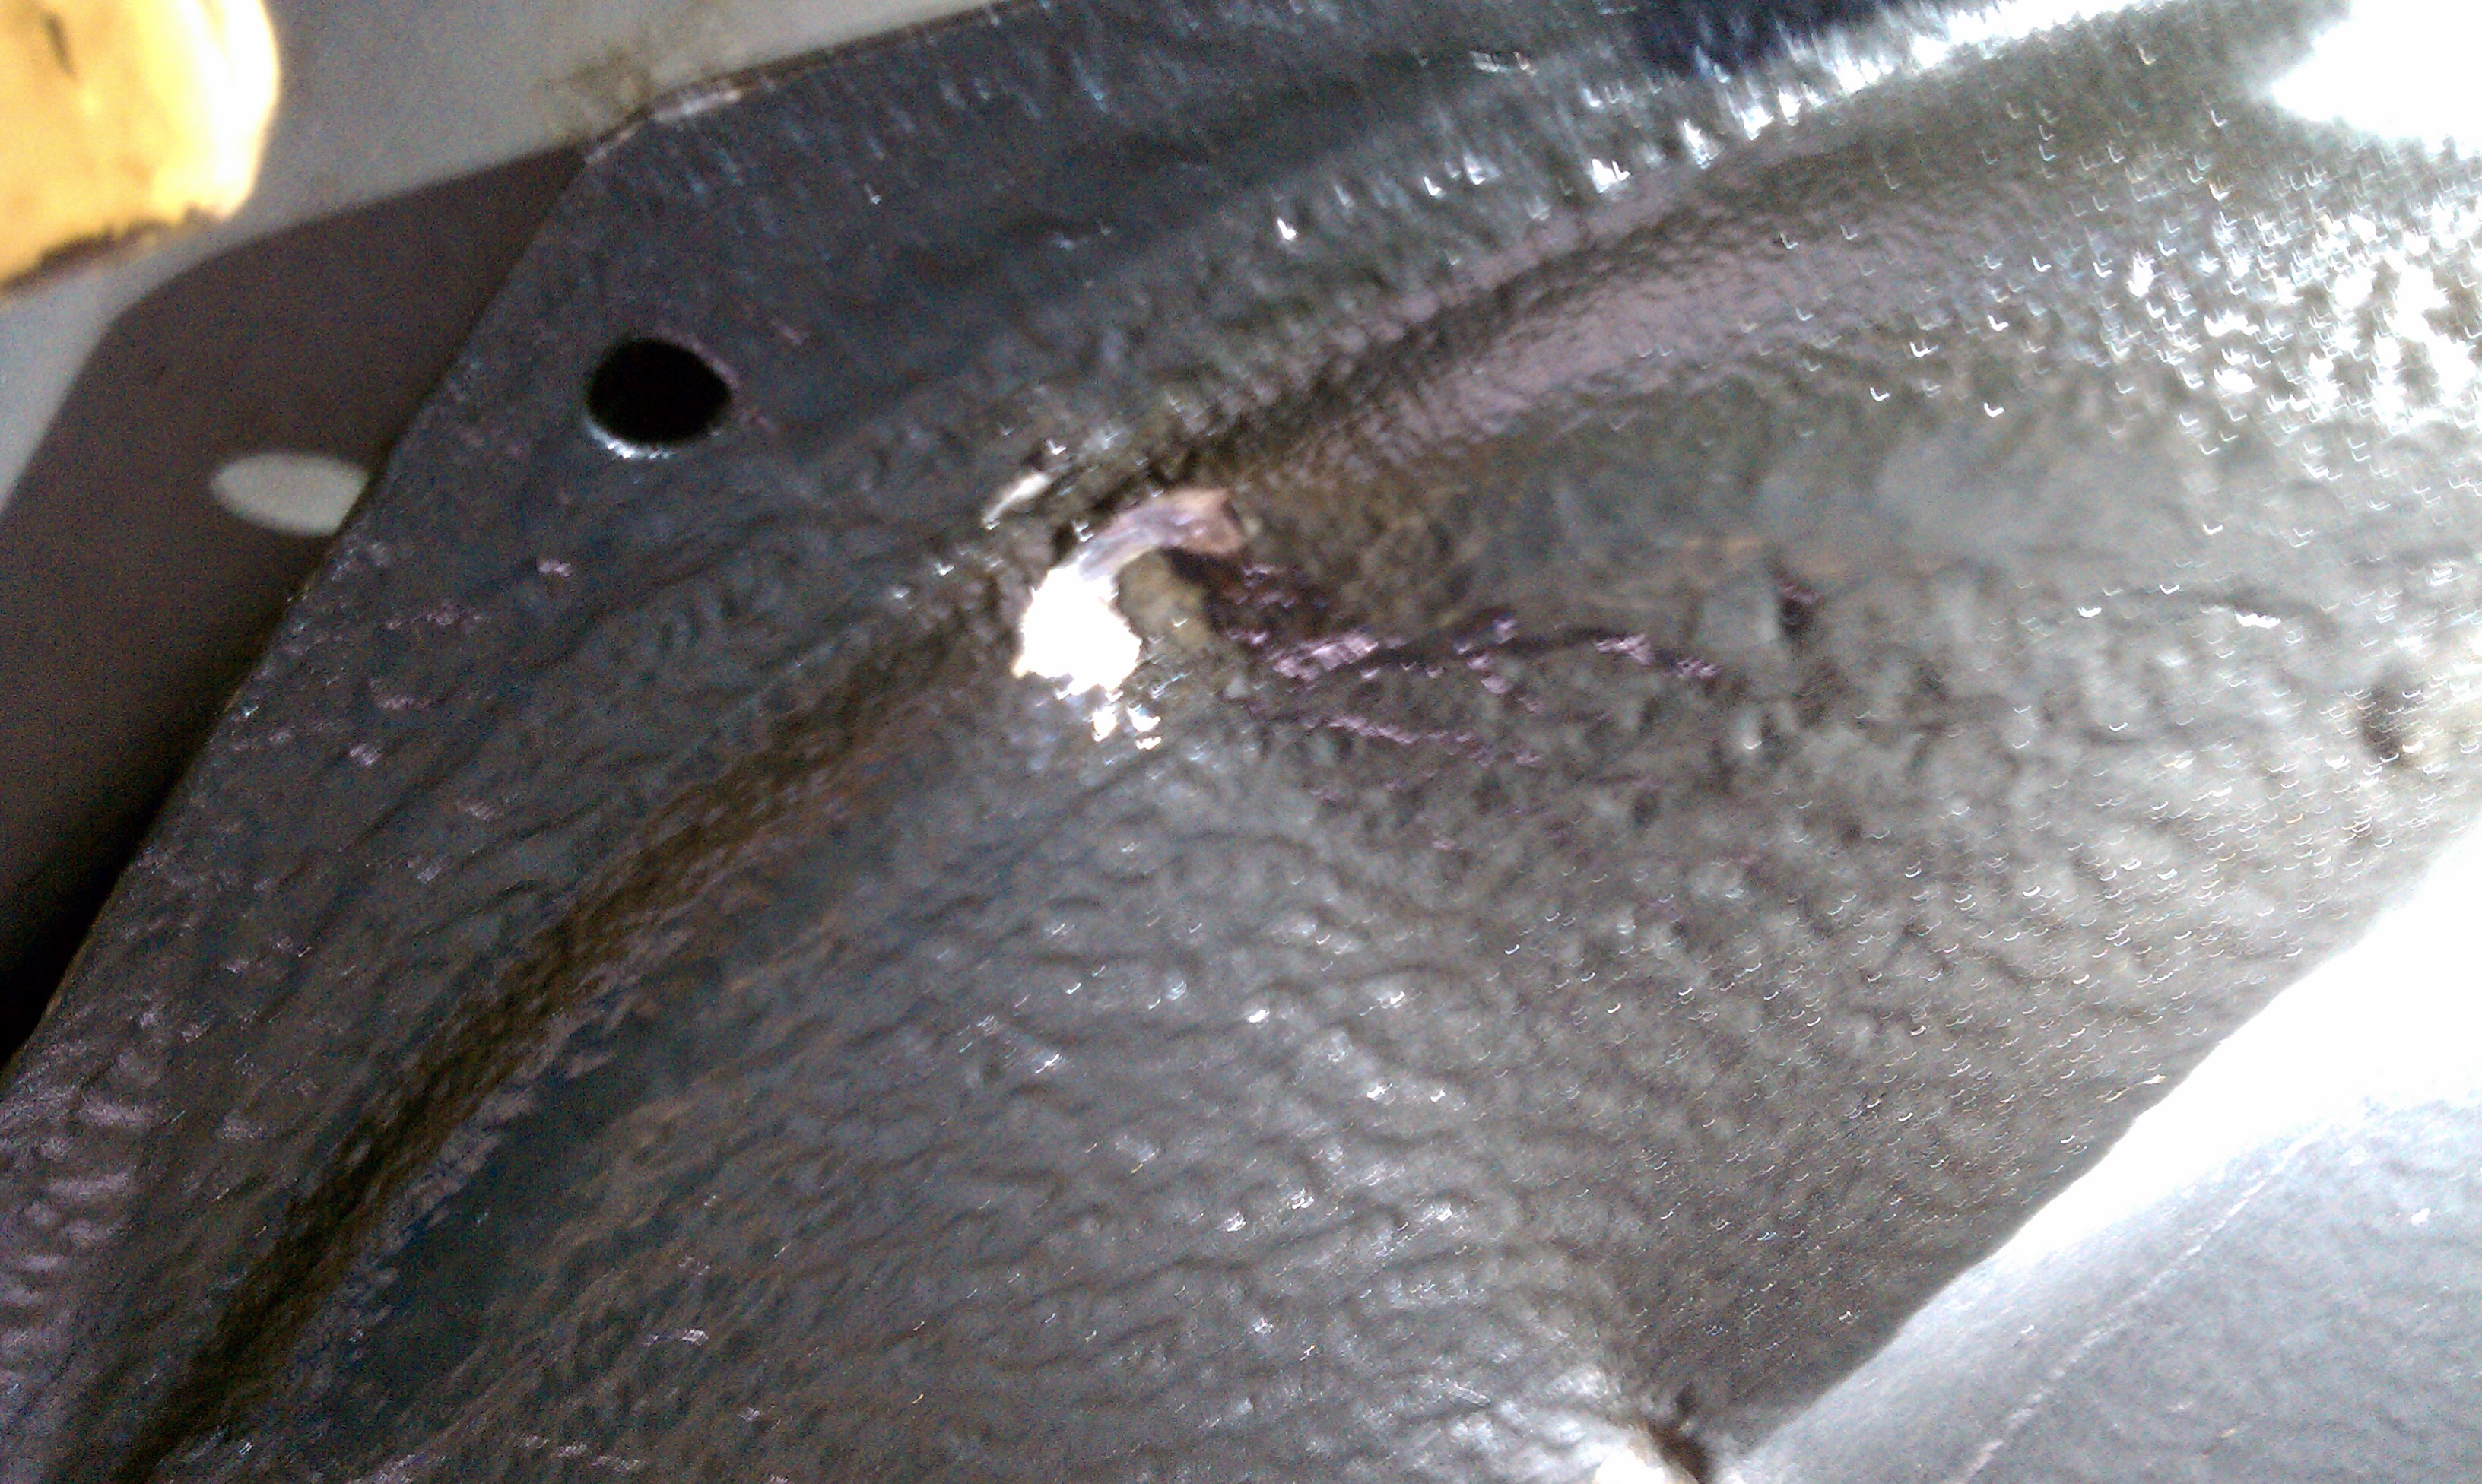 Picture of the punctured fuel tank